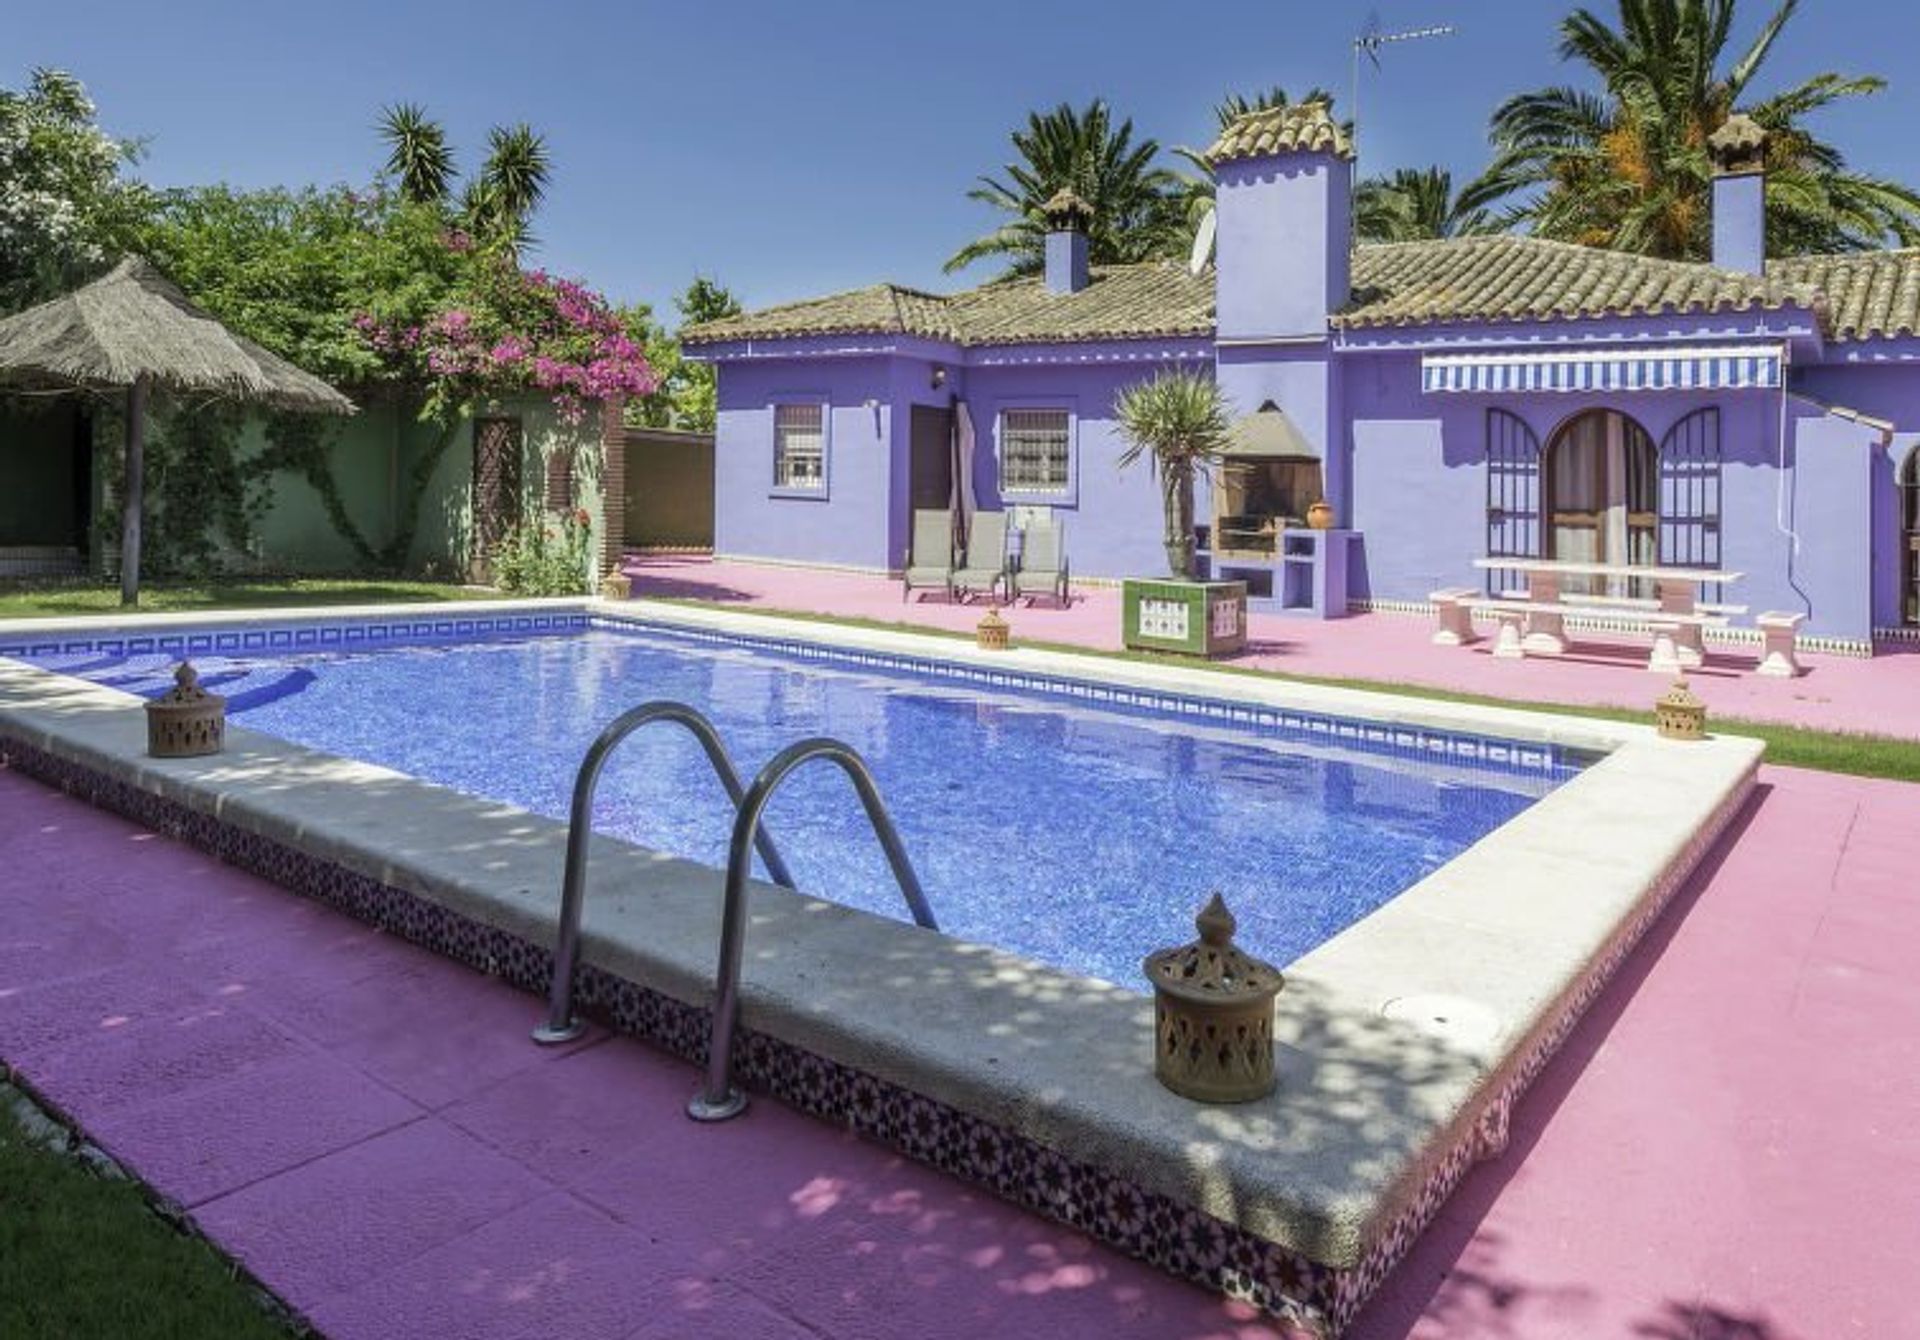 Colourful beach villa with 4 bedrooms and a private pool some 15 km south of Cadiz, near a golf course